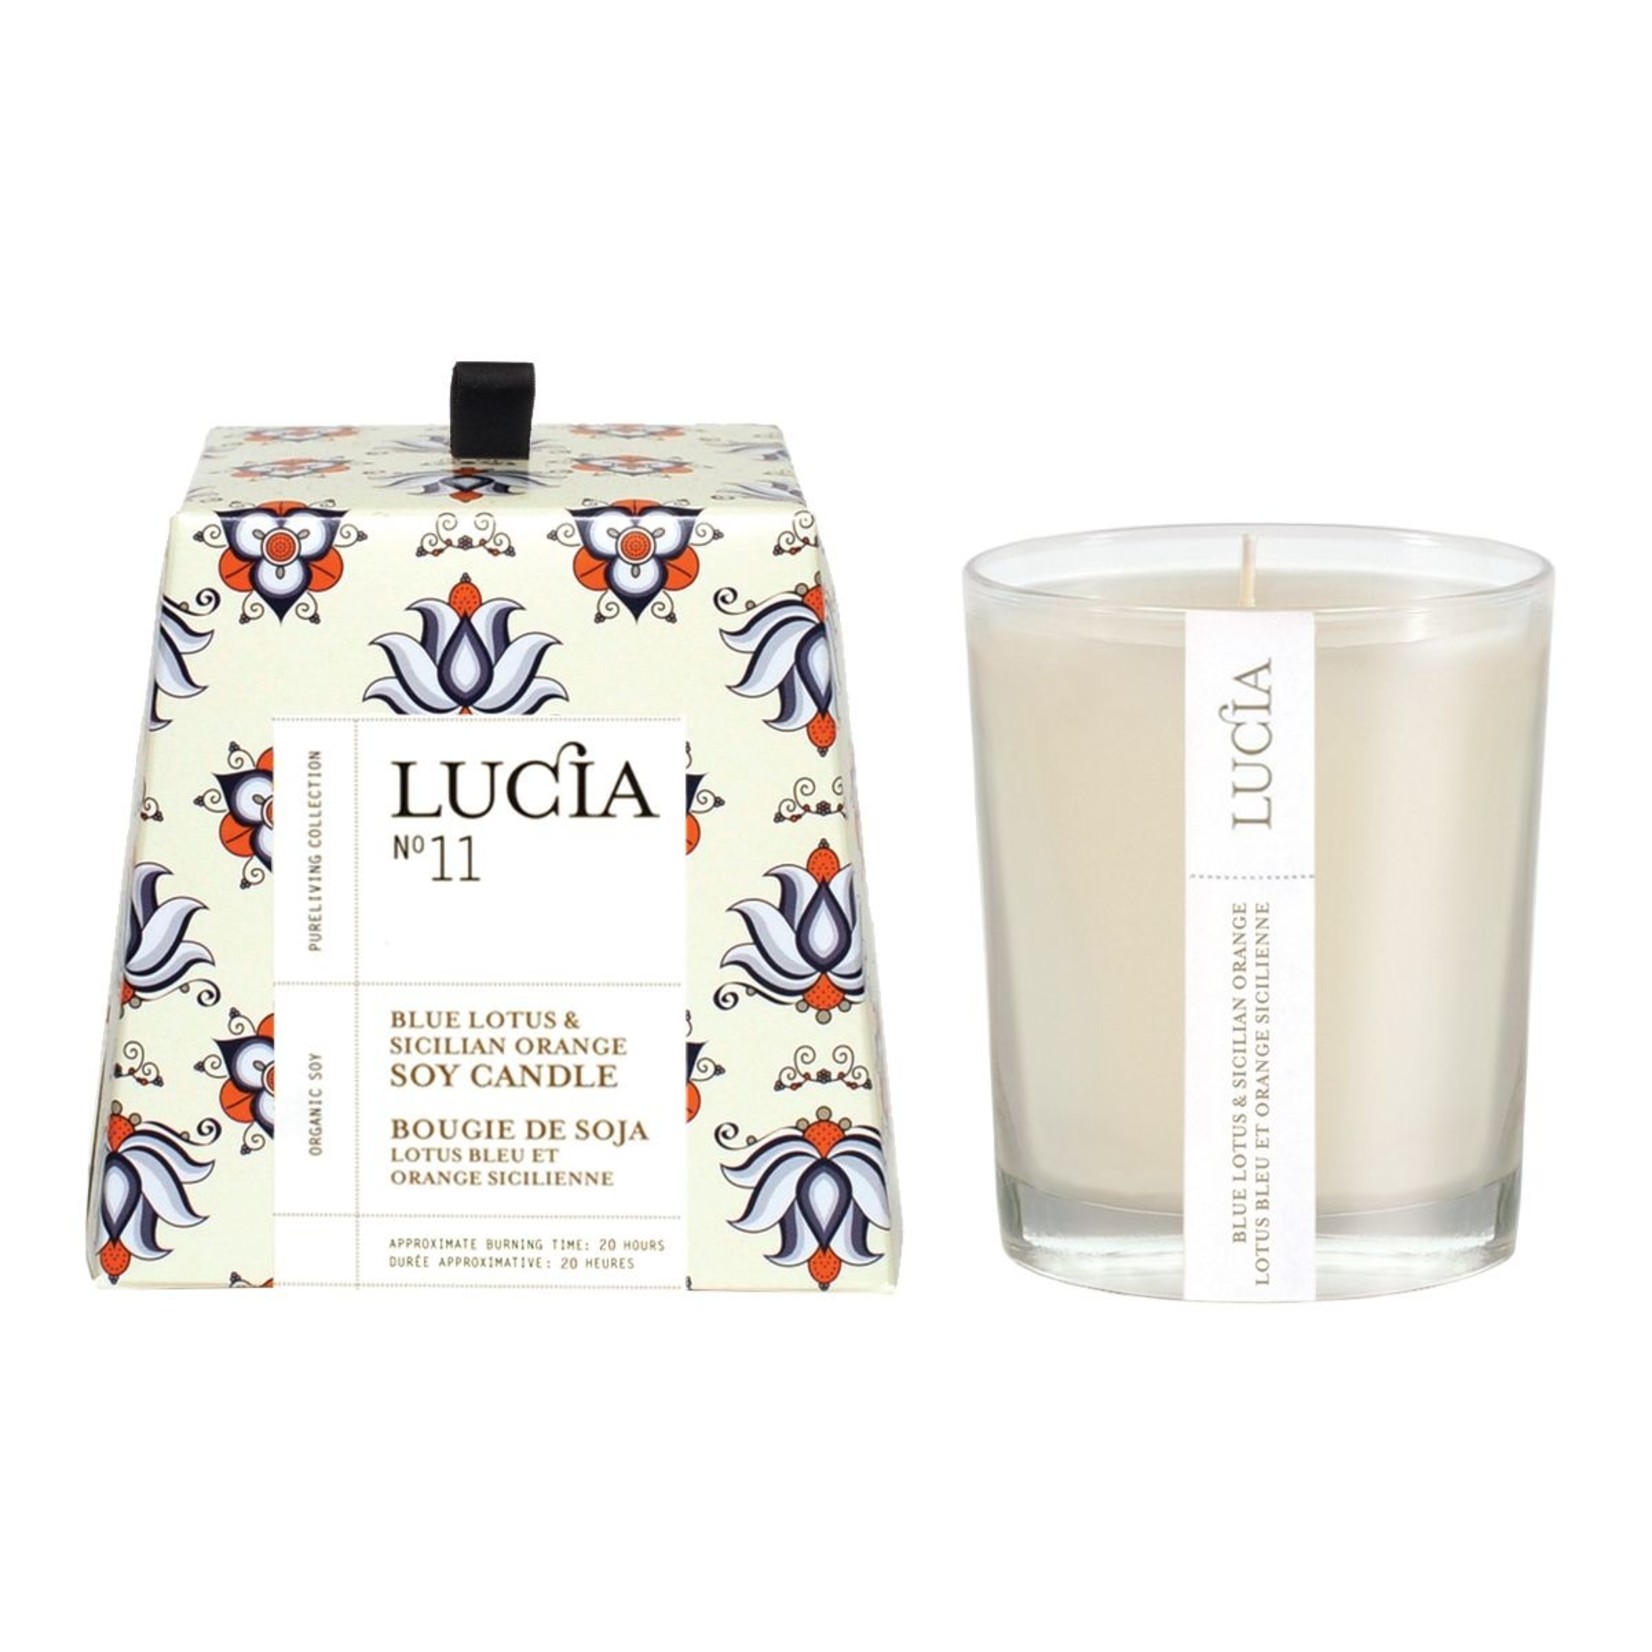 Lucia Lucia Scented Votive Candles